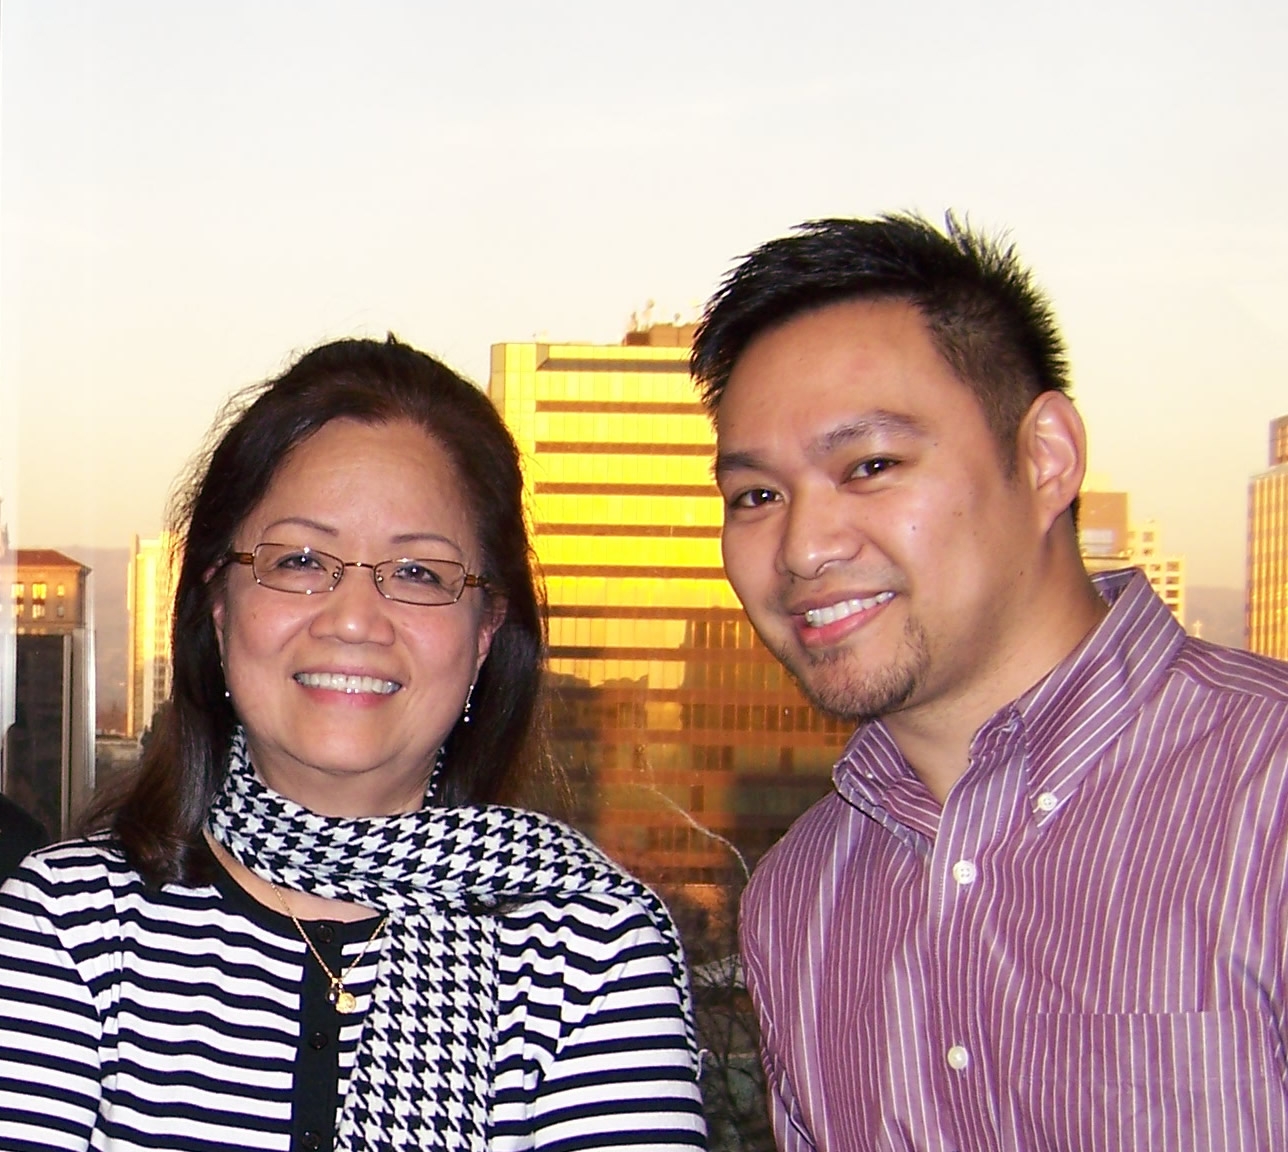 Bridge Bank employees at an after hours celebration at Bridge Bank headquarters, overlooking the downtown San Jose cityscape.